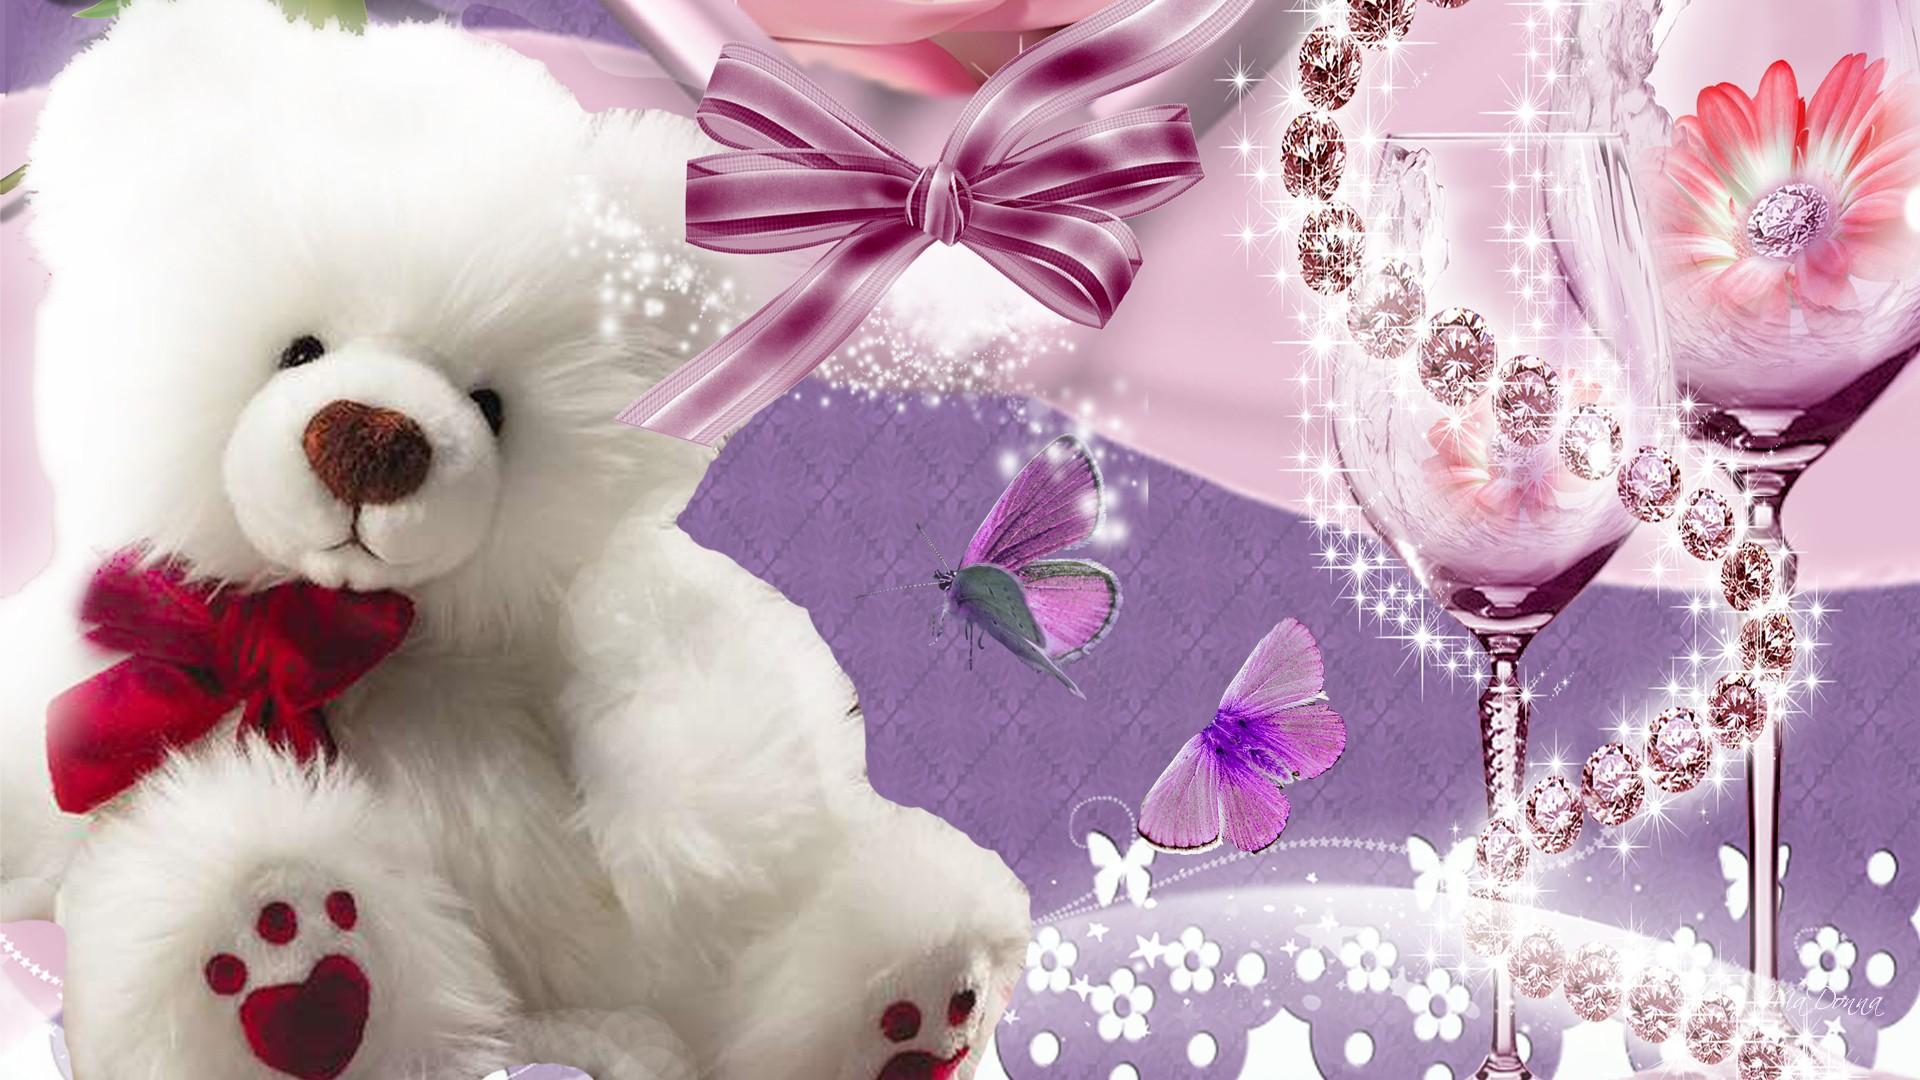 teddy day images for whatsapp dp profile wallpapers